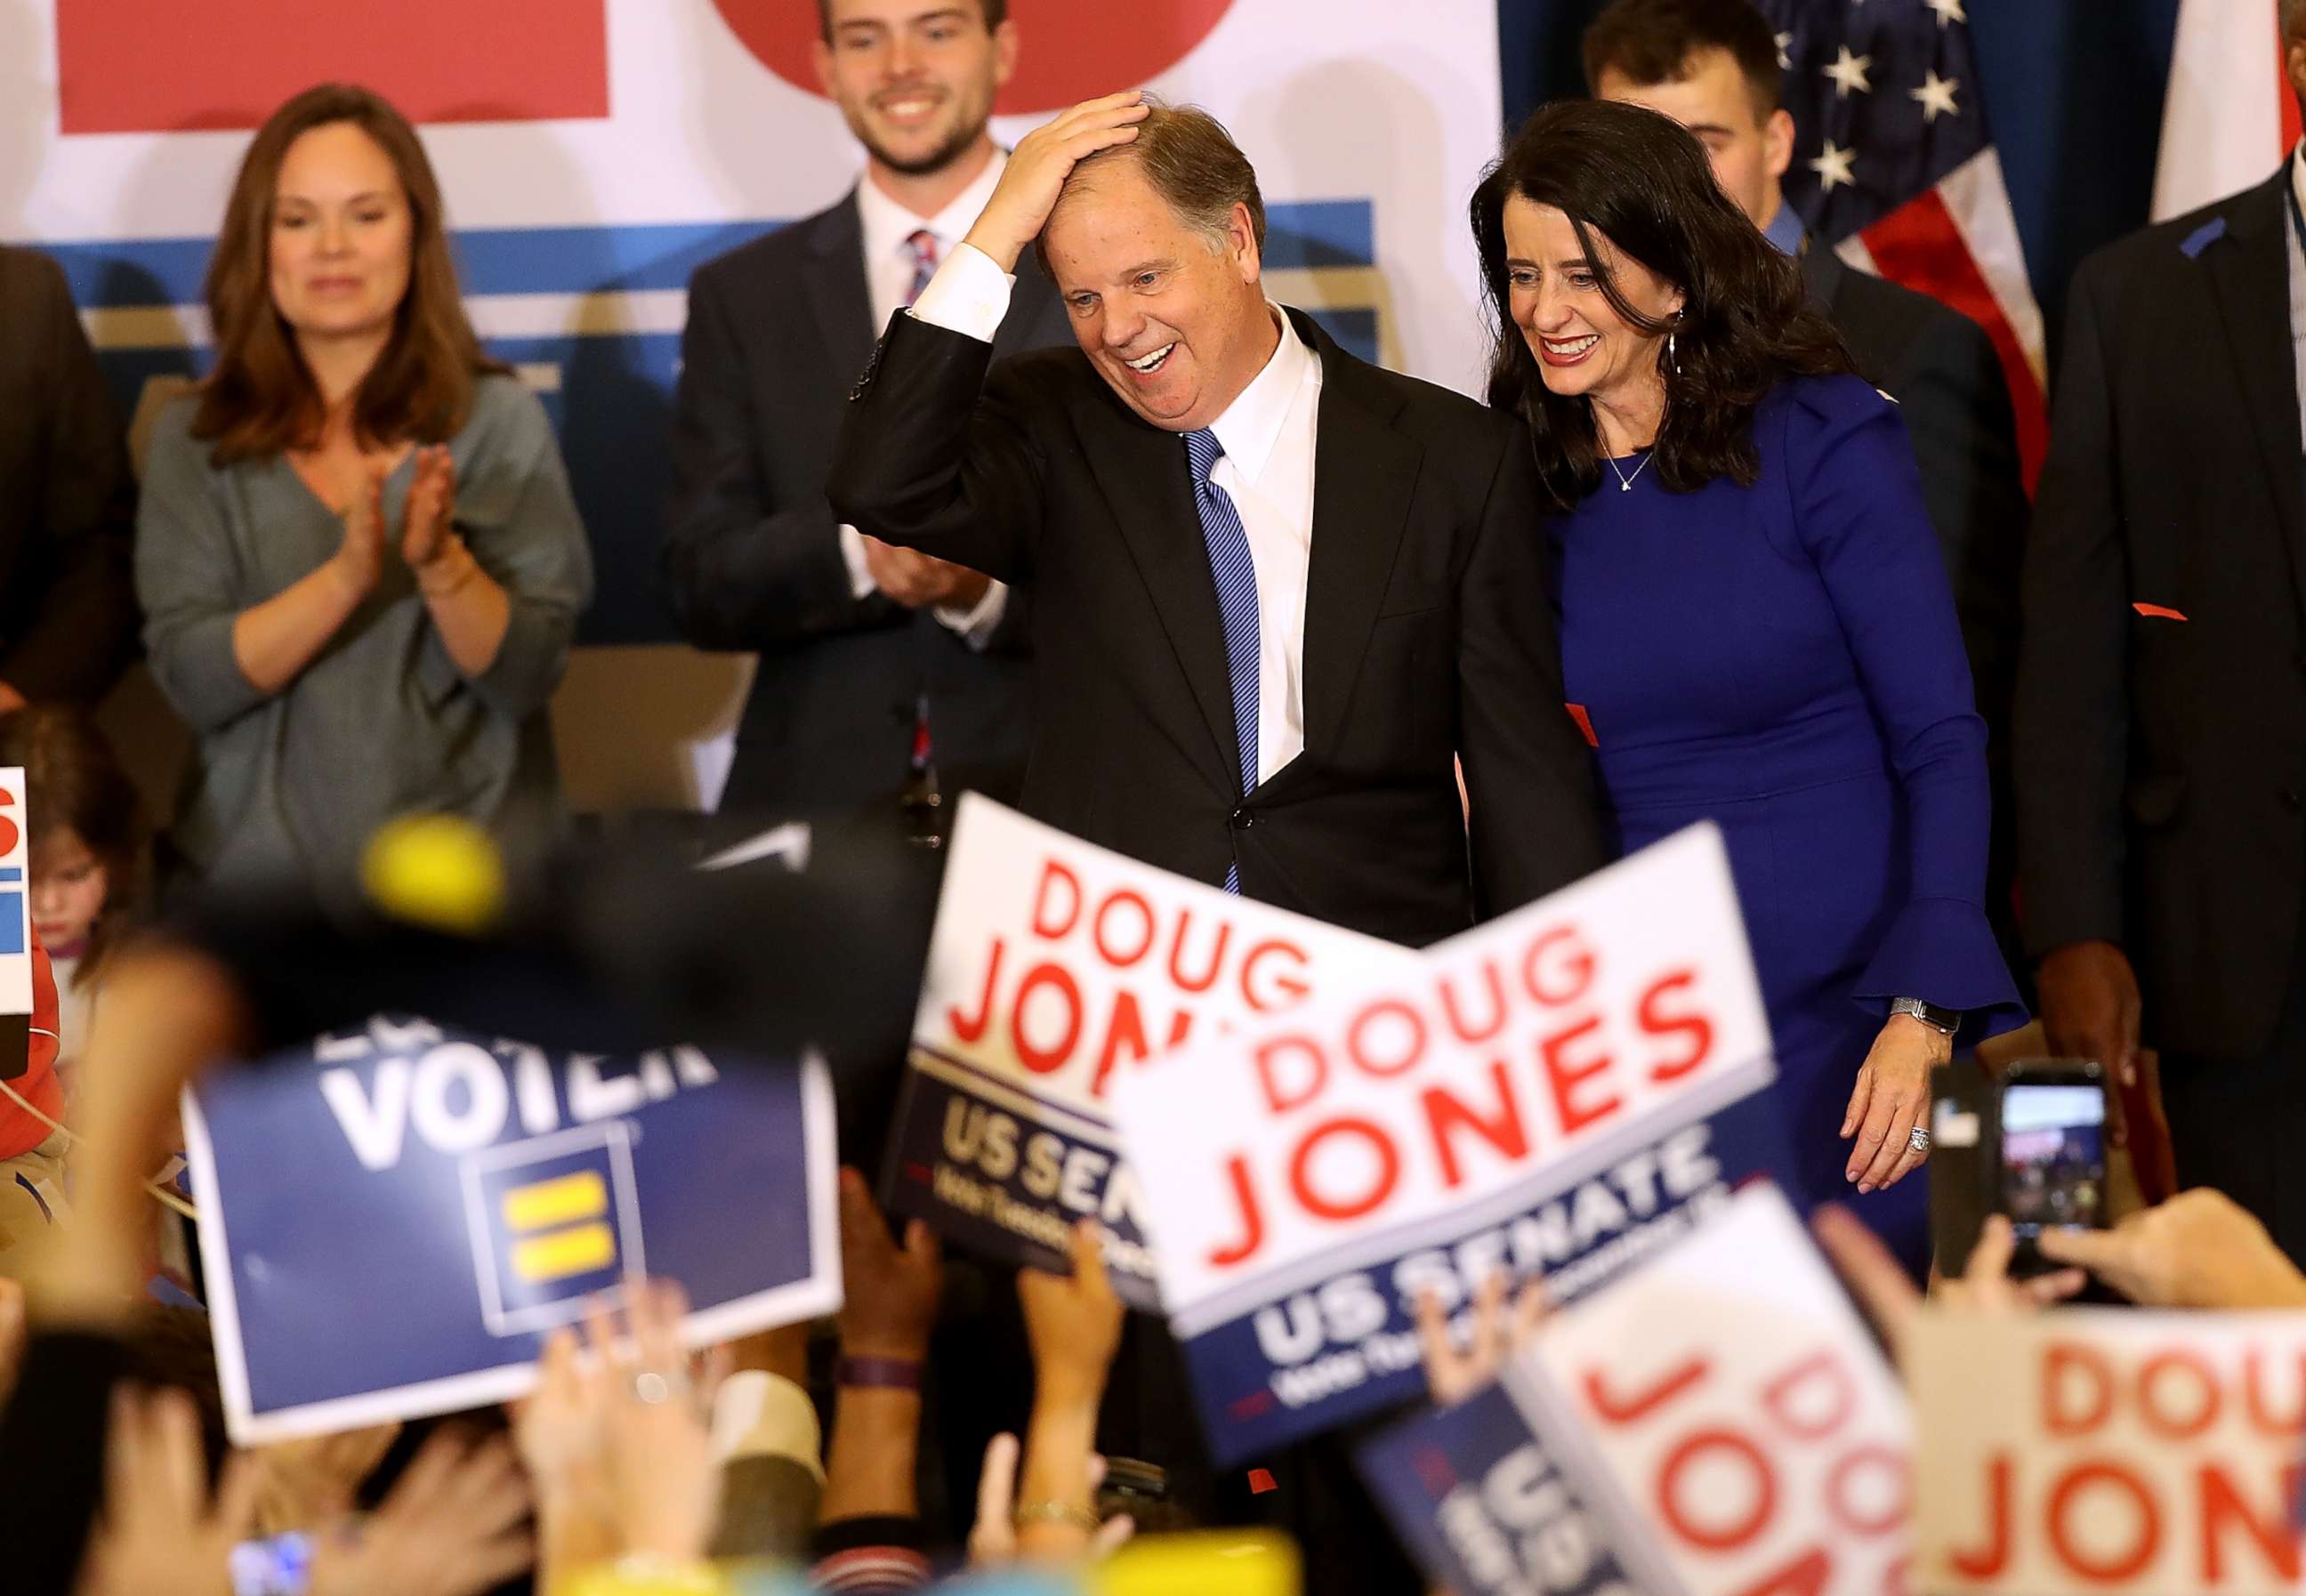 PHOTO: Senate candidate Doug Jones greets supporters during his election night gathering the Sheraton Hotel on Dec. 12, 2017 in Birmingham, Ala.